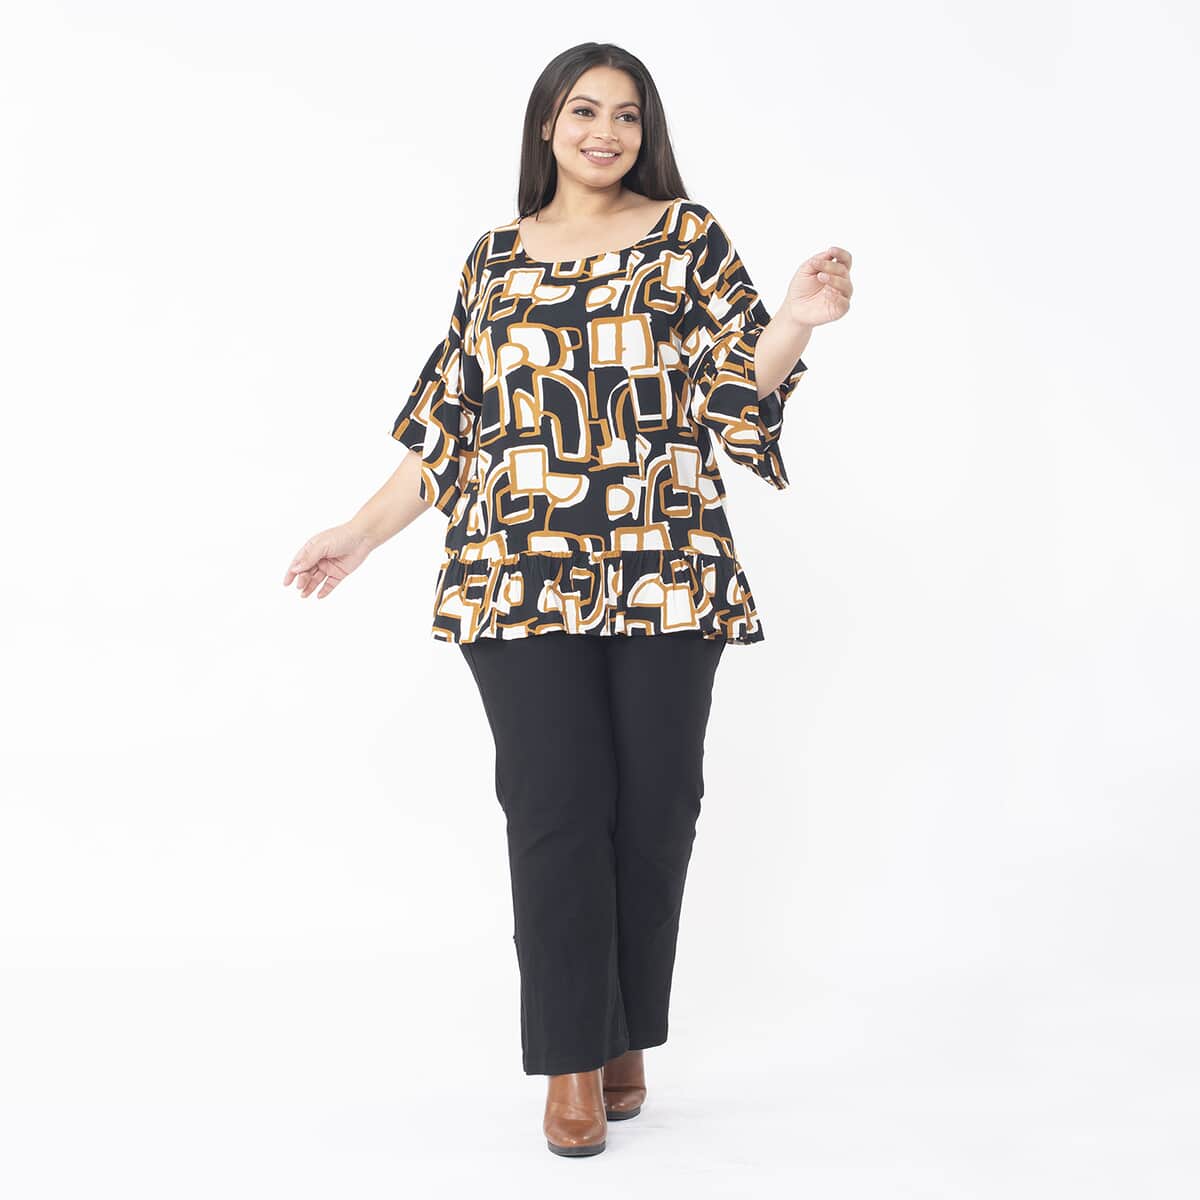 Tamsy Brown Square Top with Frill on Sleeve Opening and Hem - One Size Fits Most image number 0